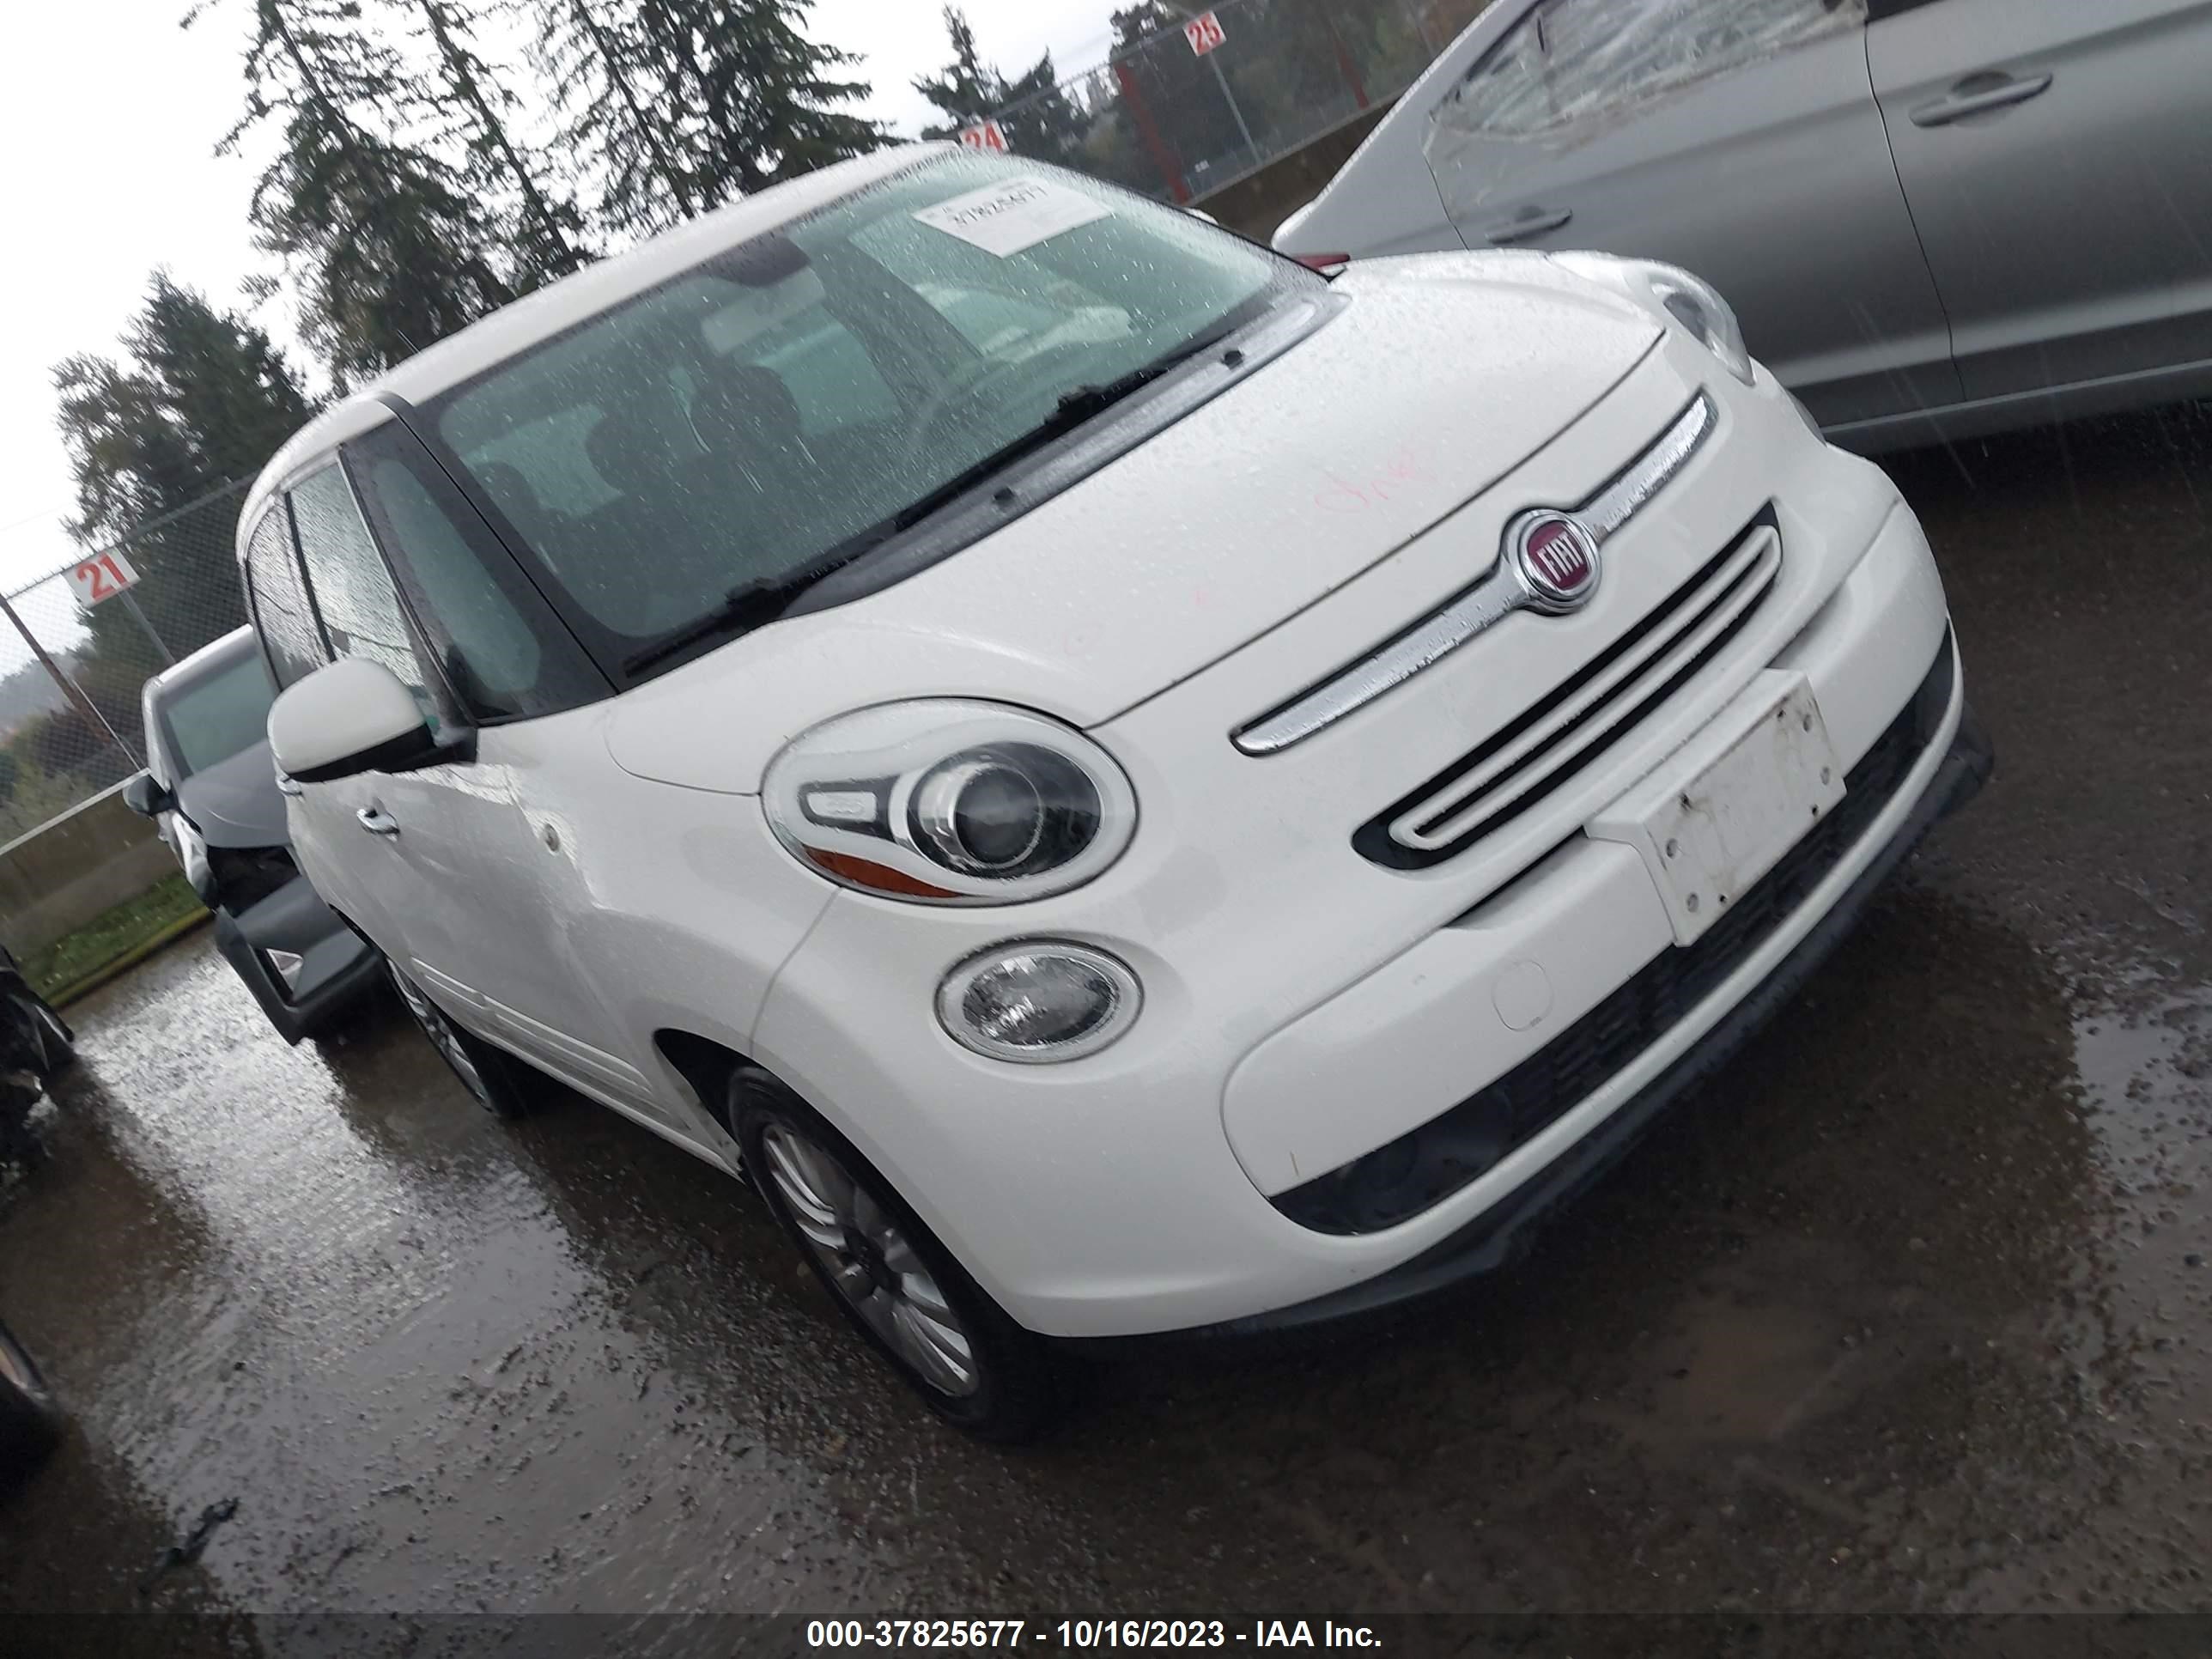 vin: ZFBCFABH6EZ025611 ZFBCFABH6EZ025611 2014 fiat 500l 1400 for Sale in 98374, 15801 110Th Ave E, Puyallup, USA